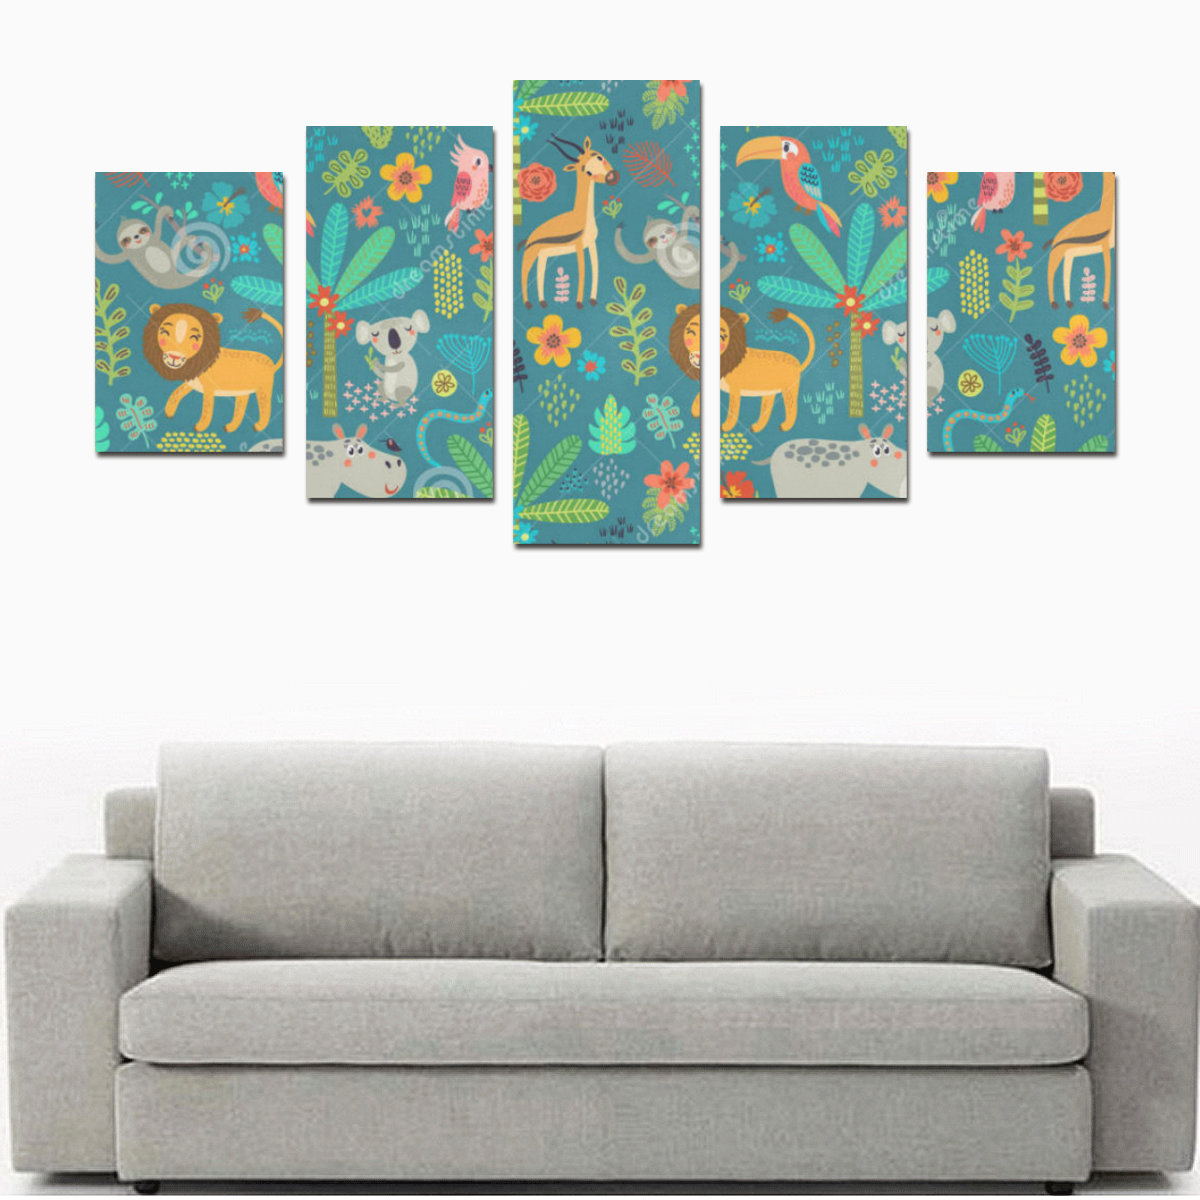 seamless-pattern-jungle-animals-flowers-trees-9181 Canvas Print Sets D (No Frame)